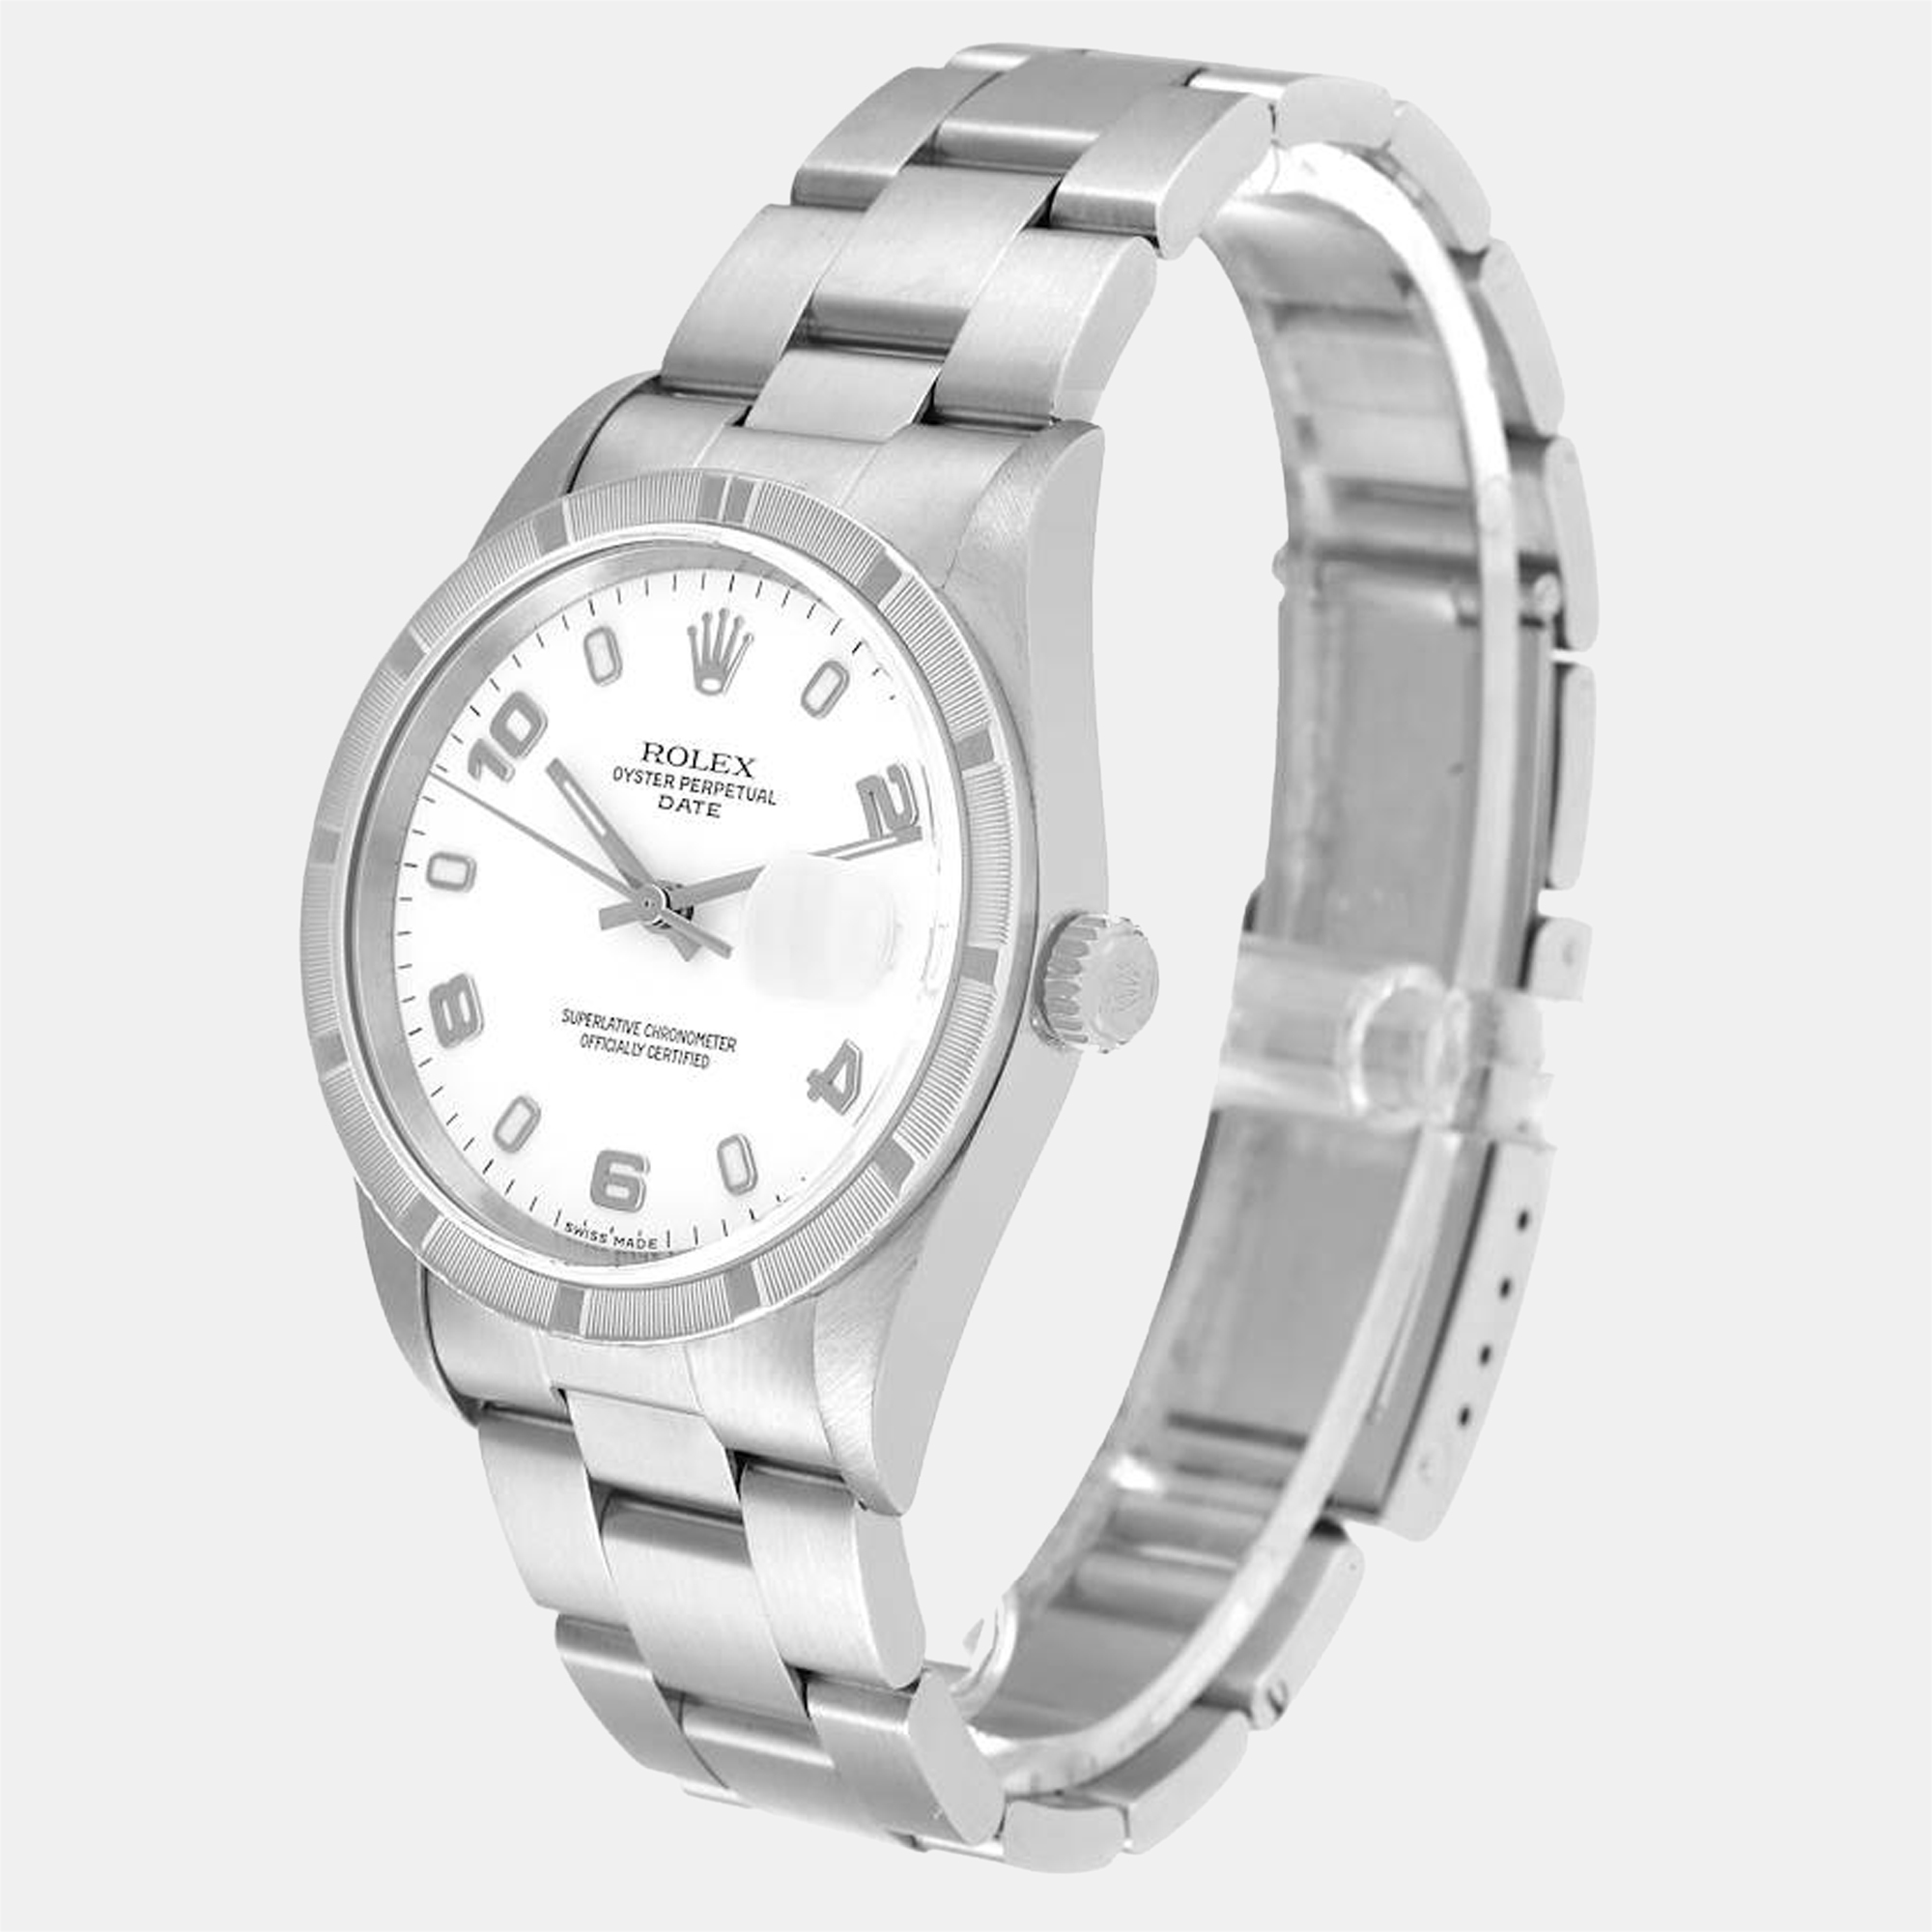 Rolex White Stainless Steel Oyster Perpetual Date 15210 Automatic Men's Wristwatch 34 Mm